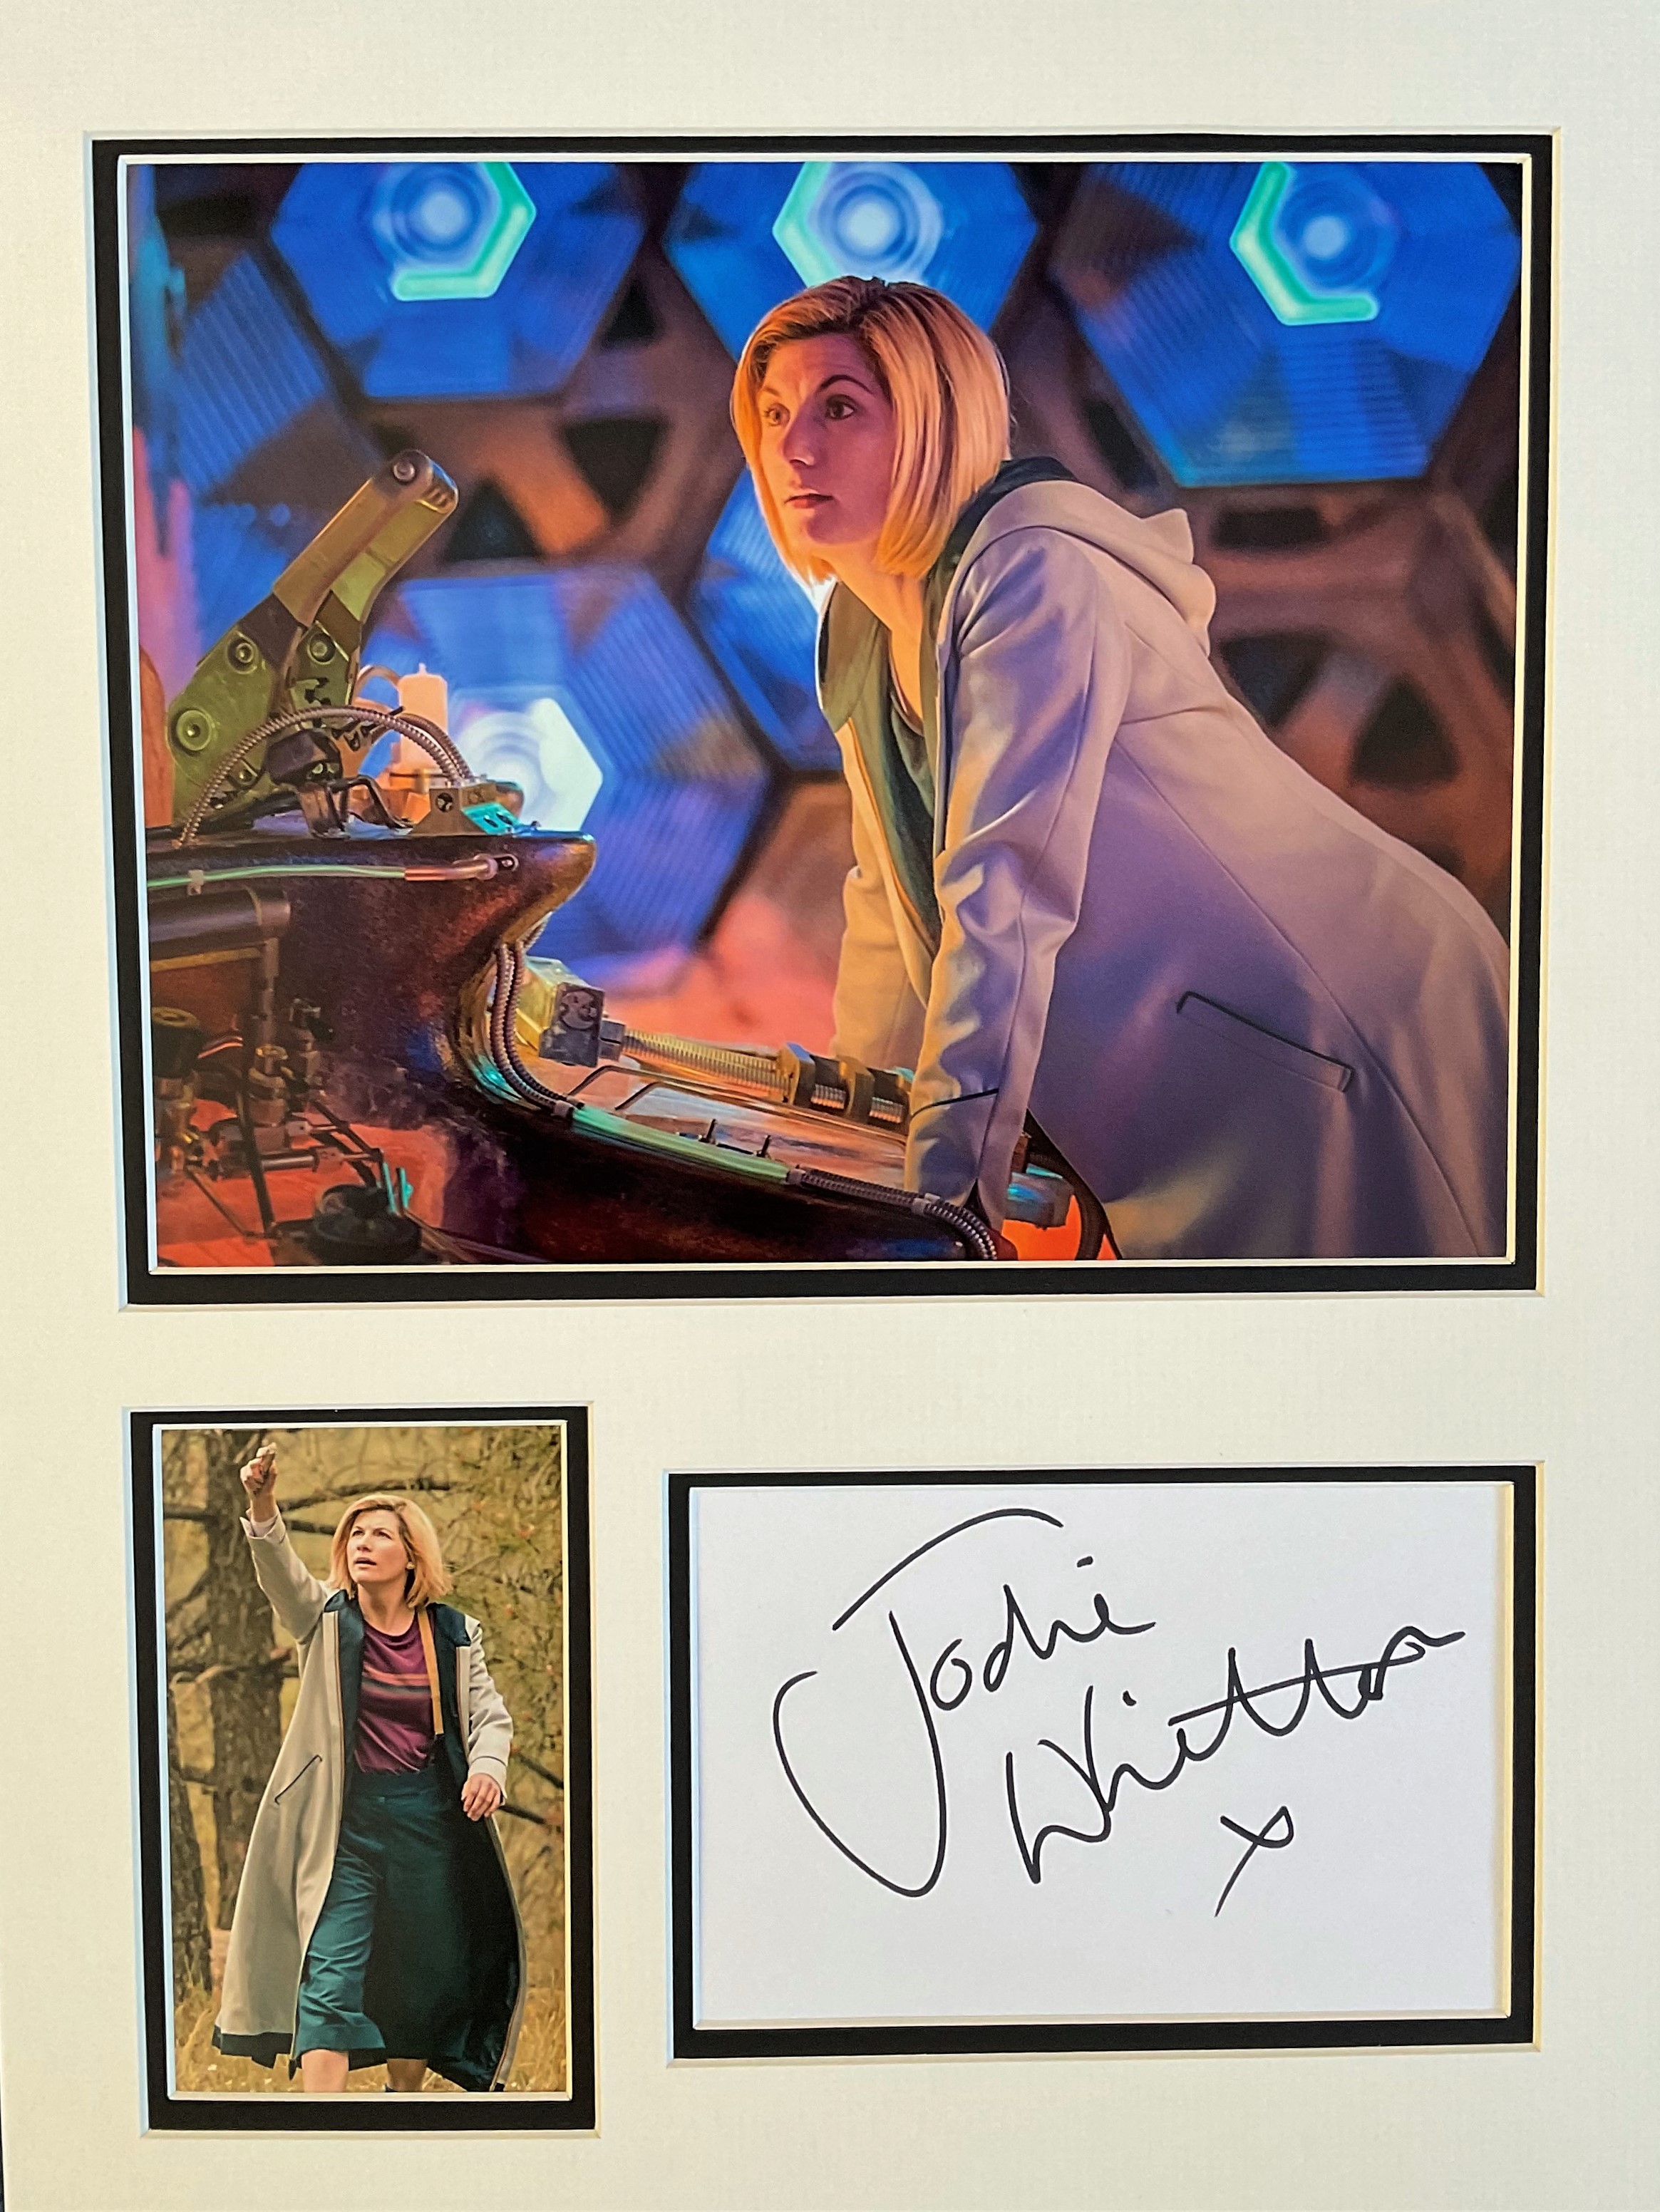 Dr Who. Jodie Whittaker 13th Doctor Handsigned signature Card with 10x8 and 5x3 Colour Photos,